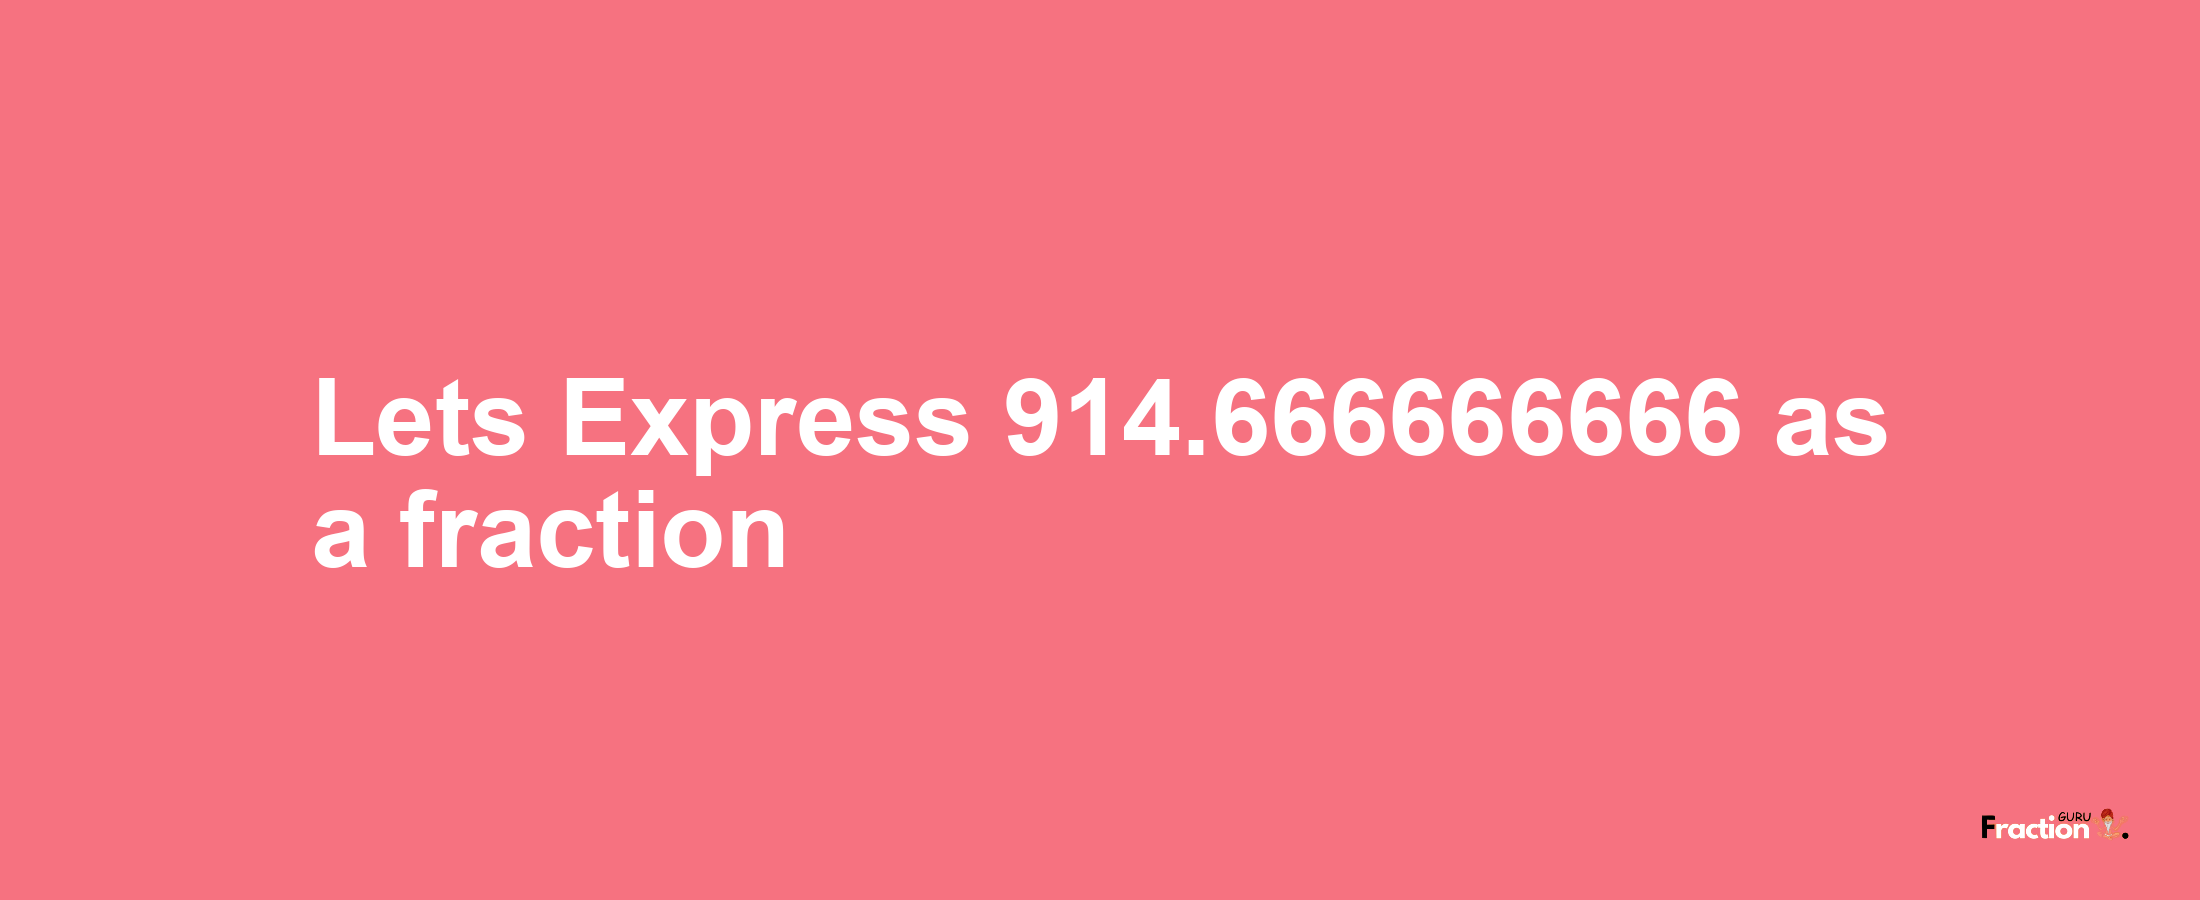 Lets Express 914.666666666 as afraction